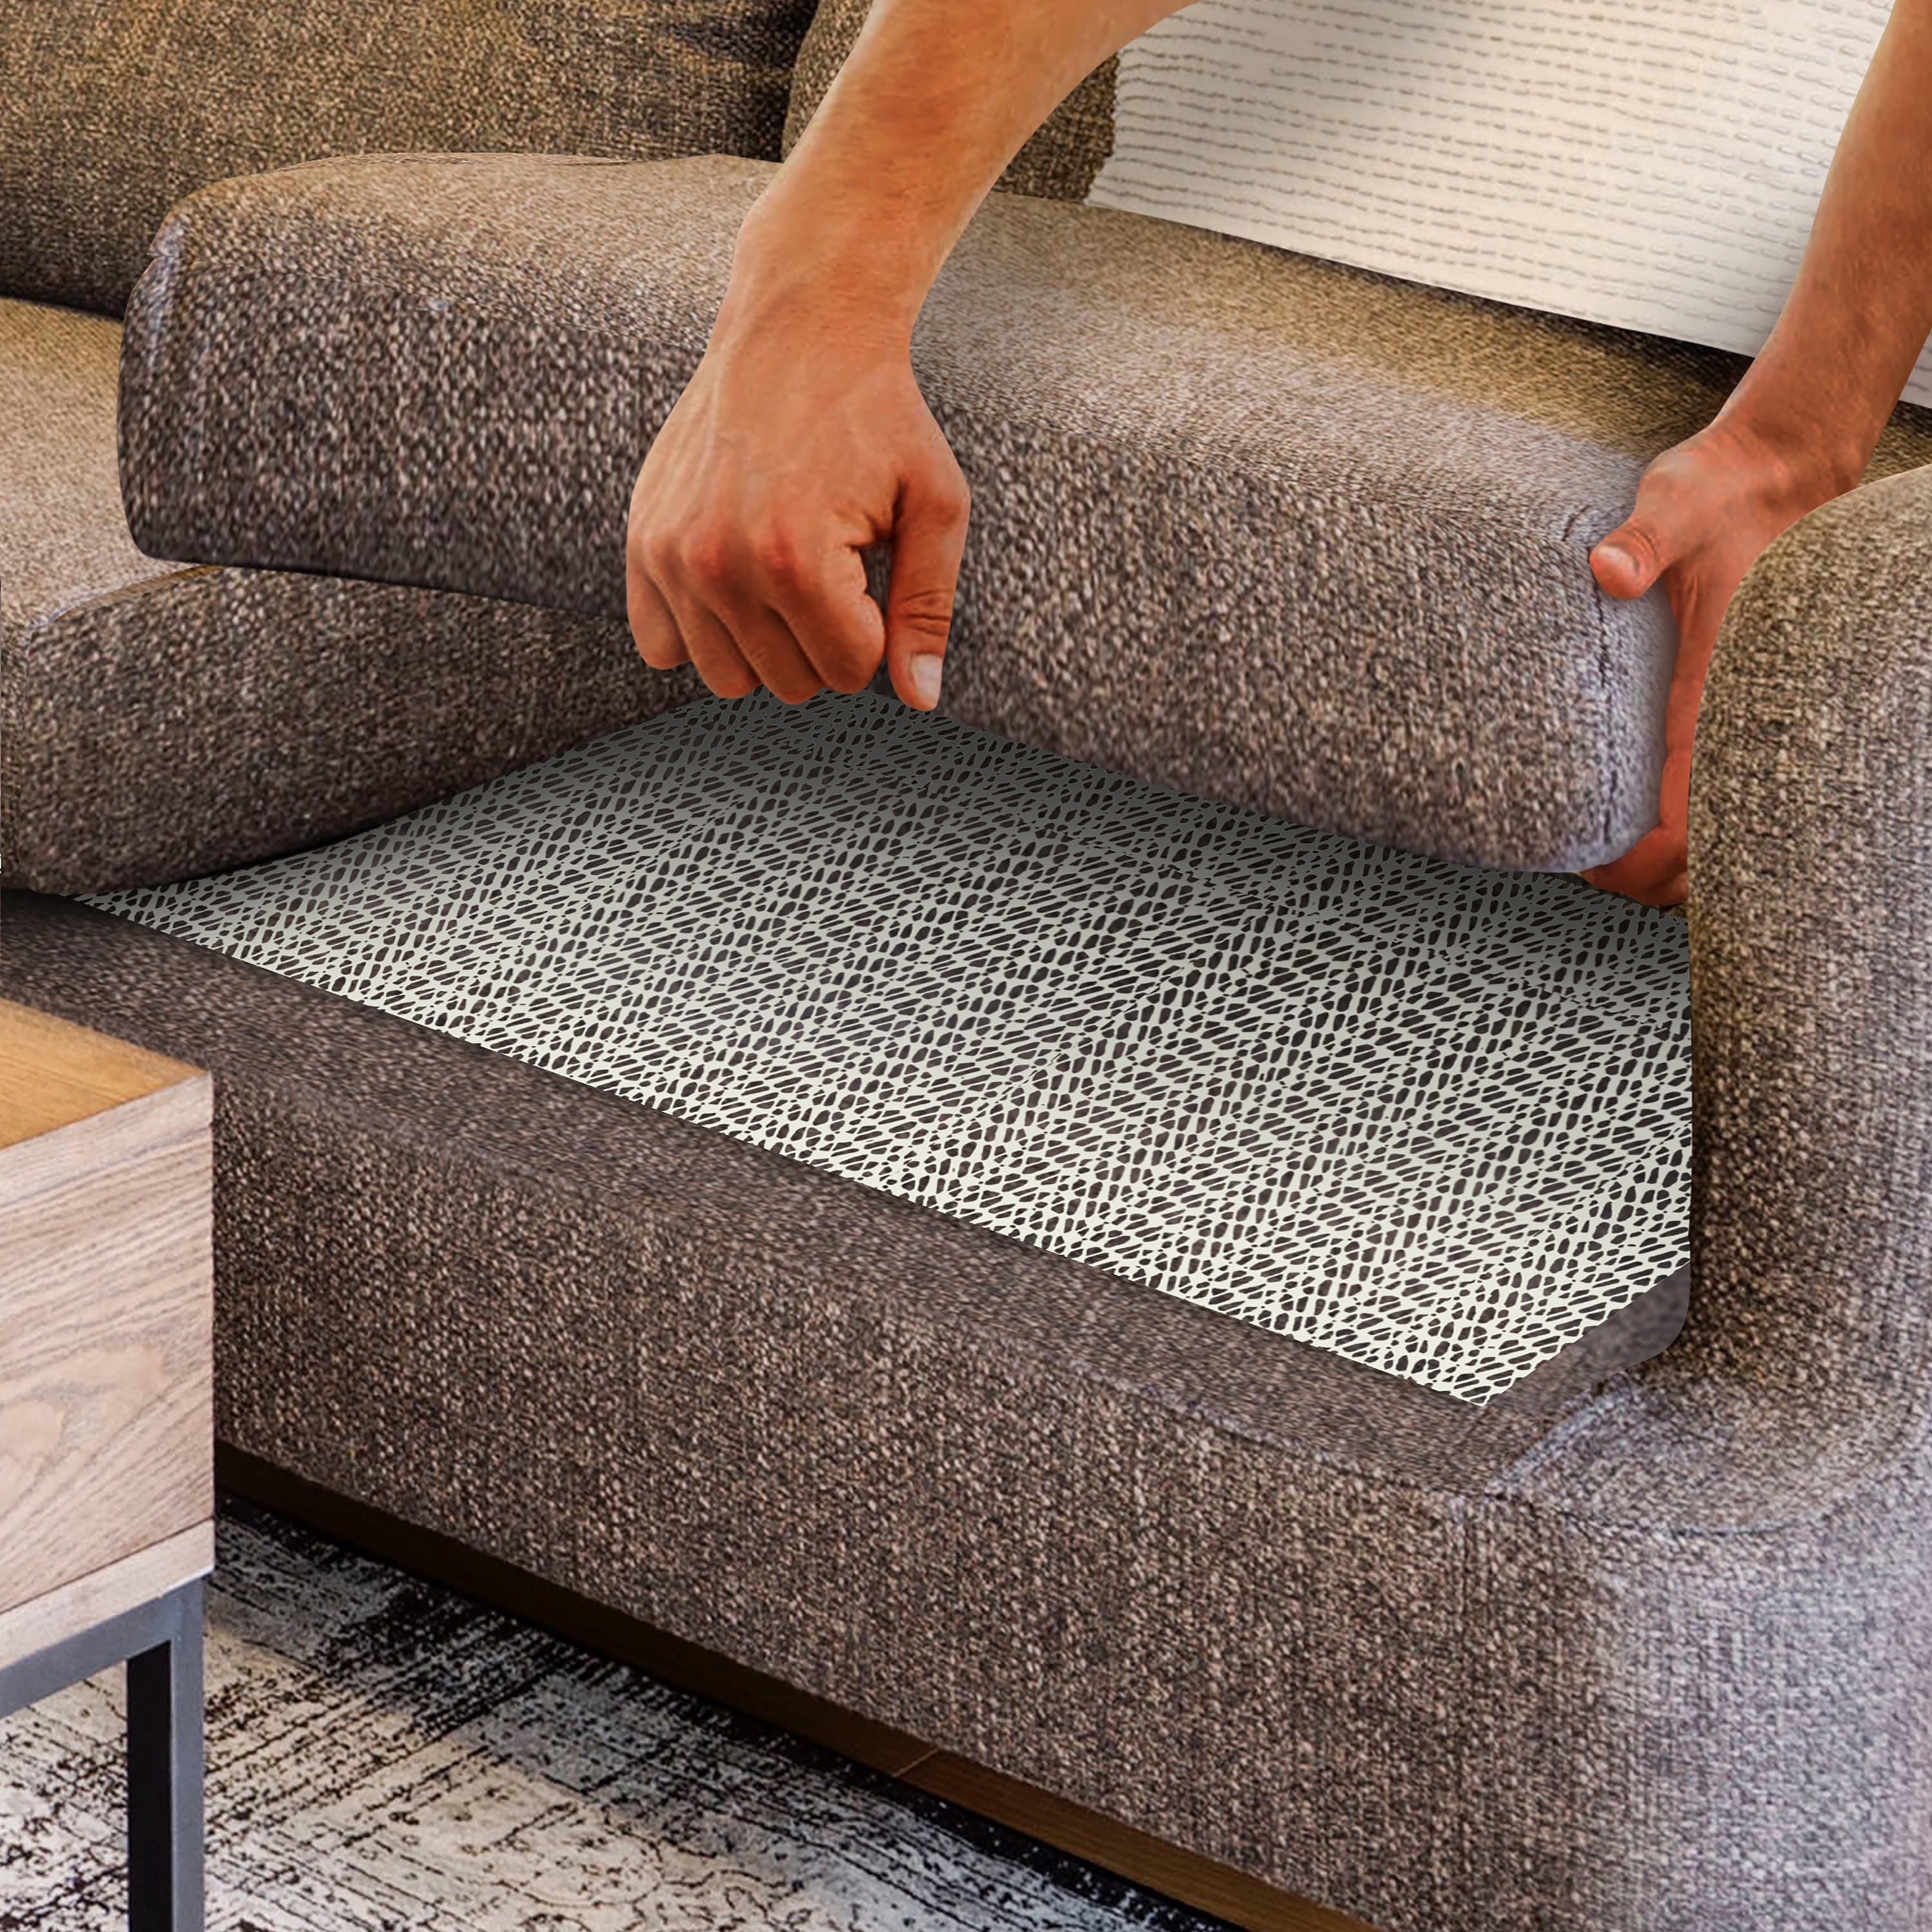 Nevlers Non-Slip Grip Pad for Armchair Cushions - 24 x 24